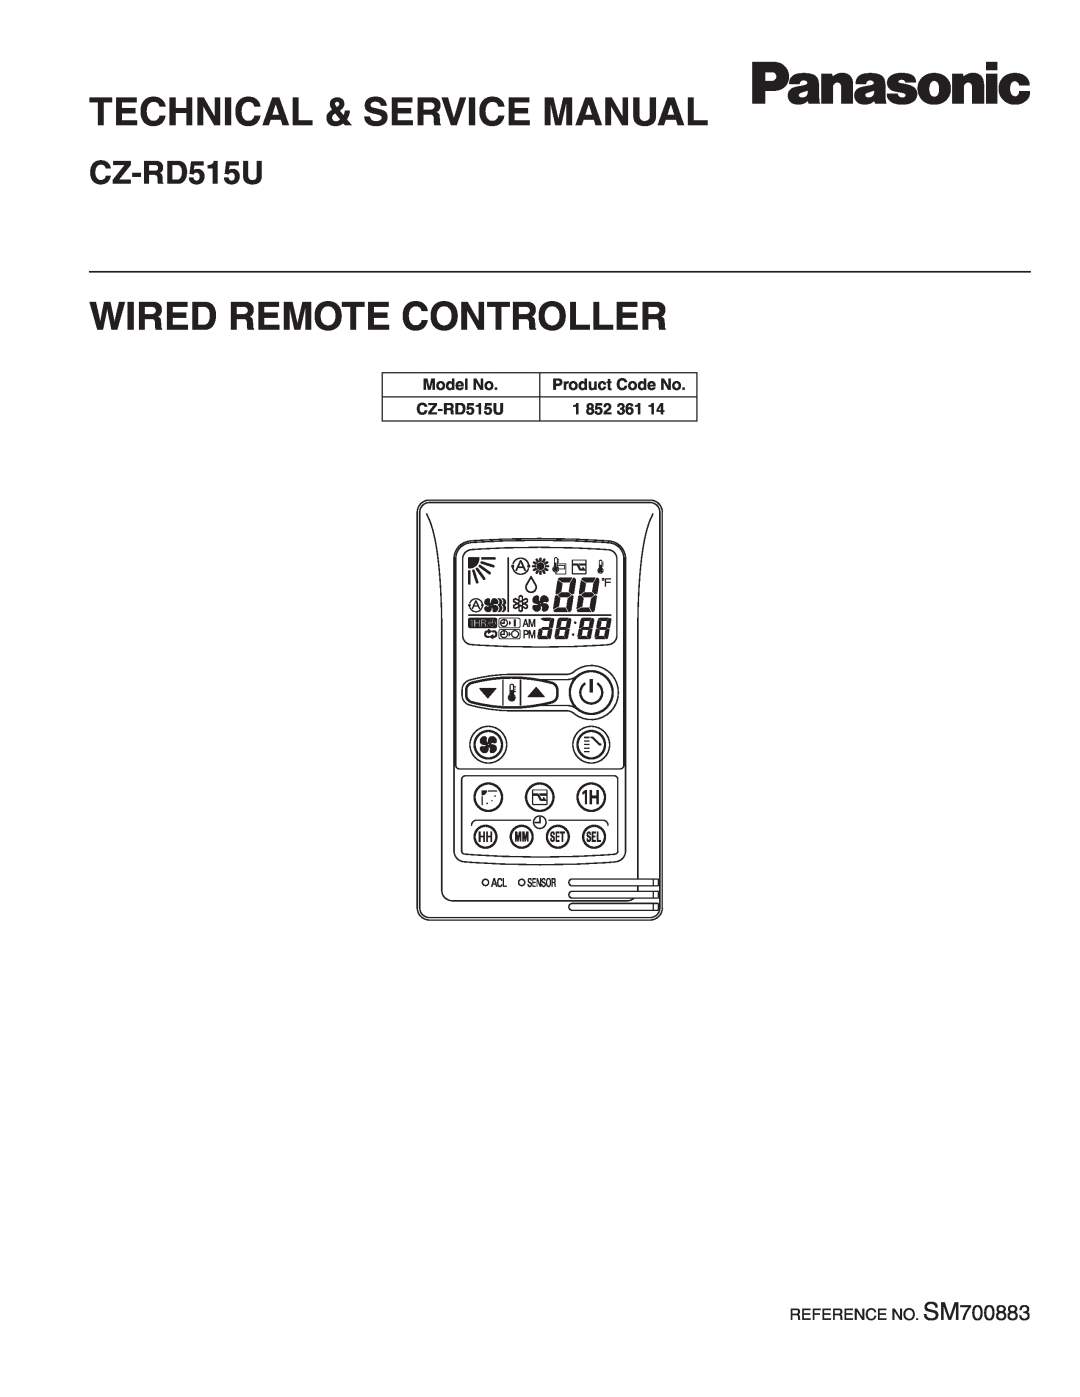 Panasonic CZ-RD515U service manual Wired Remote Controller, Model No, Product Code No 